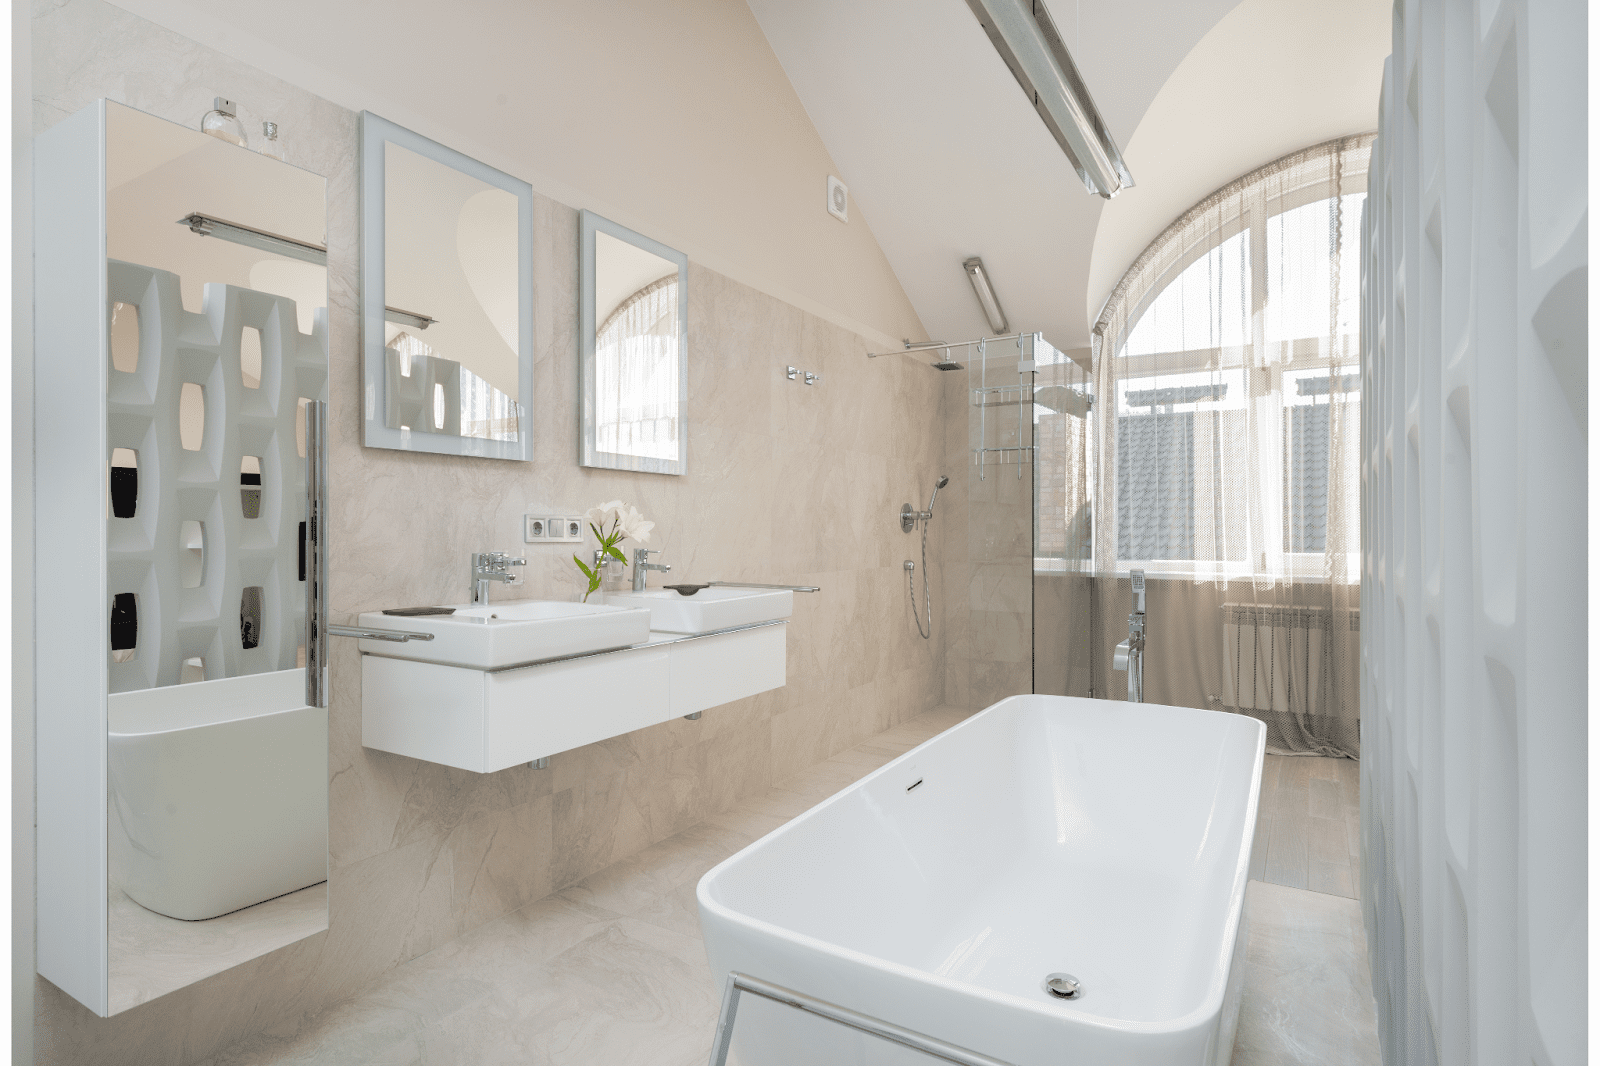 The 5 Worst Bathroom Remodeling Mistakes to Avoid